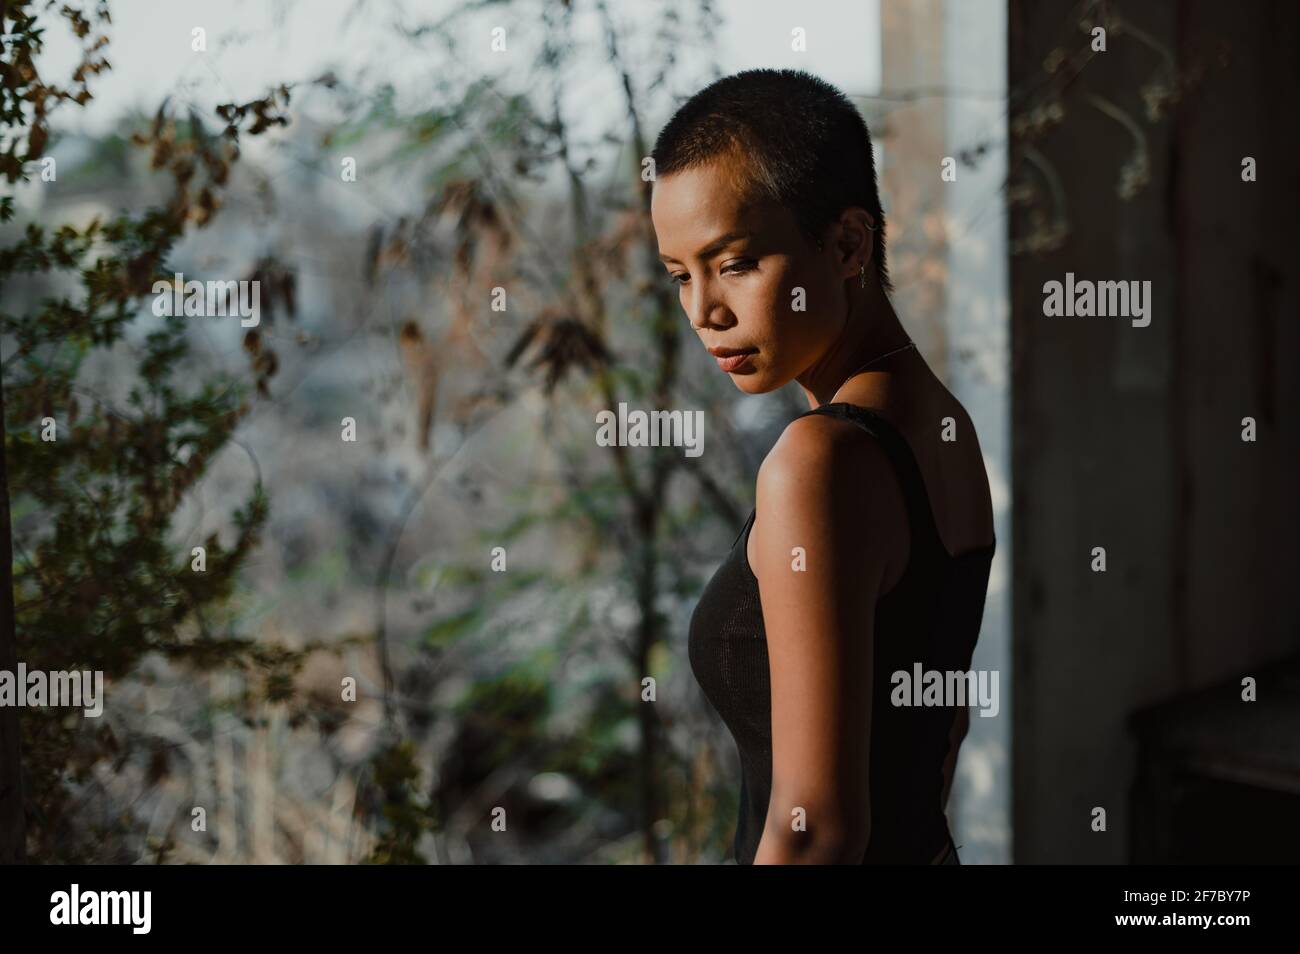 Portrait of a young short hair Asian woman standing by a big window looking down, with trees out of focus in the background. Stock Photo